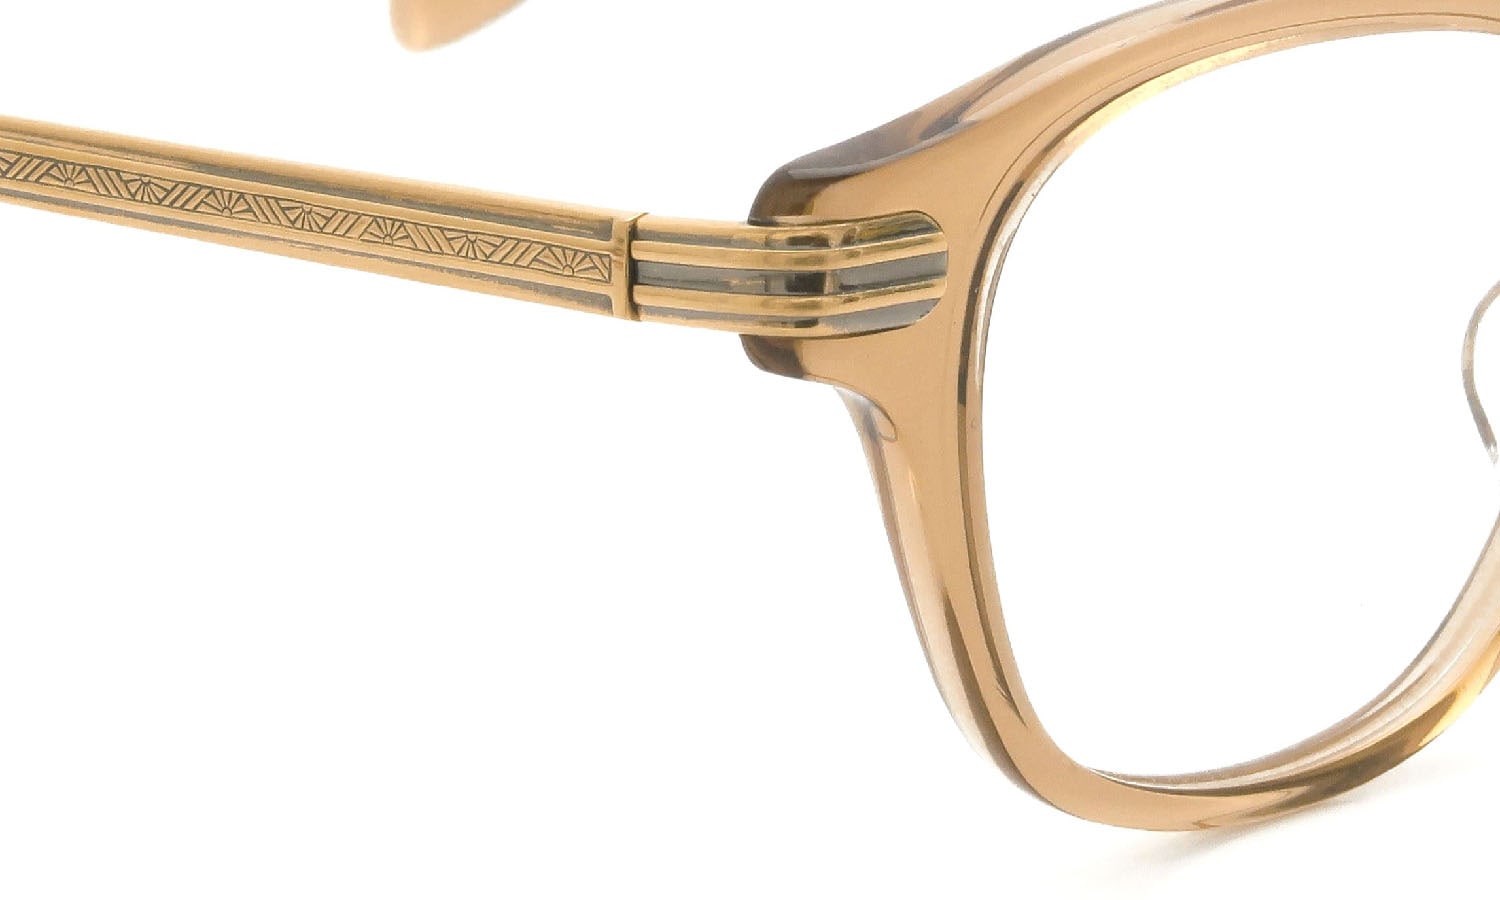 OLIVER PEOPLES Maxime 108